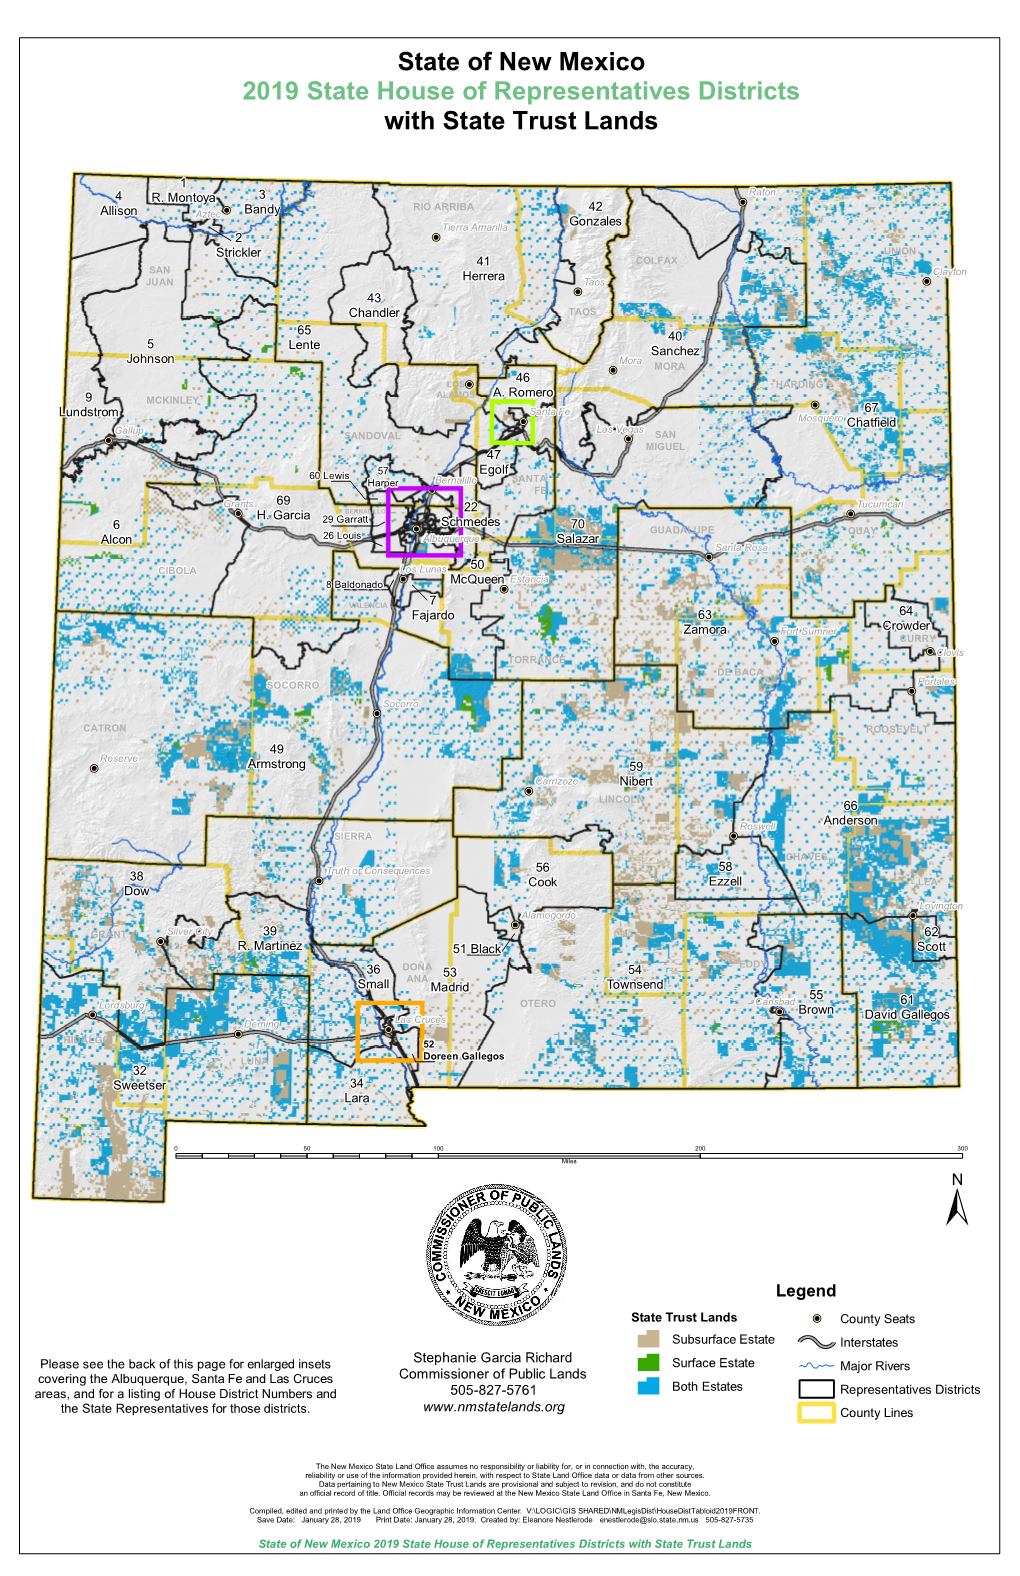 State of New Mexico with State Trust Lands 2019 State House of Representatives Districts